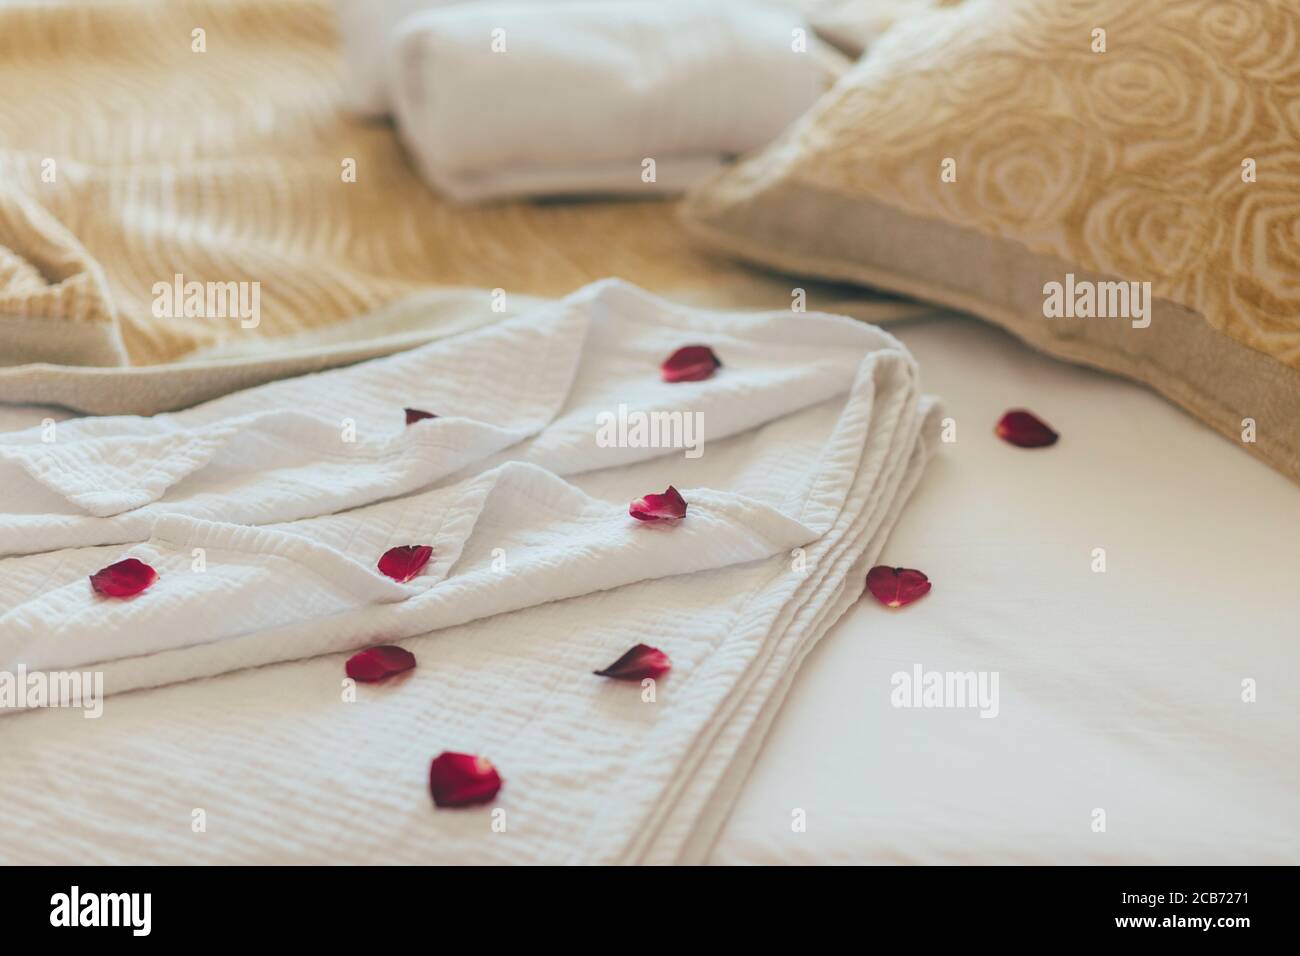 Luxury wellness and spa hotel room arranged for romantic weekend. Honeymoon suite bedroom decorated with rose petals on bed sheets. Resort holiday rel Stock Photo